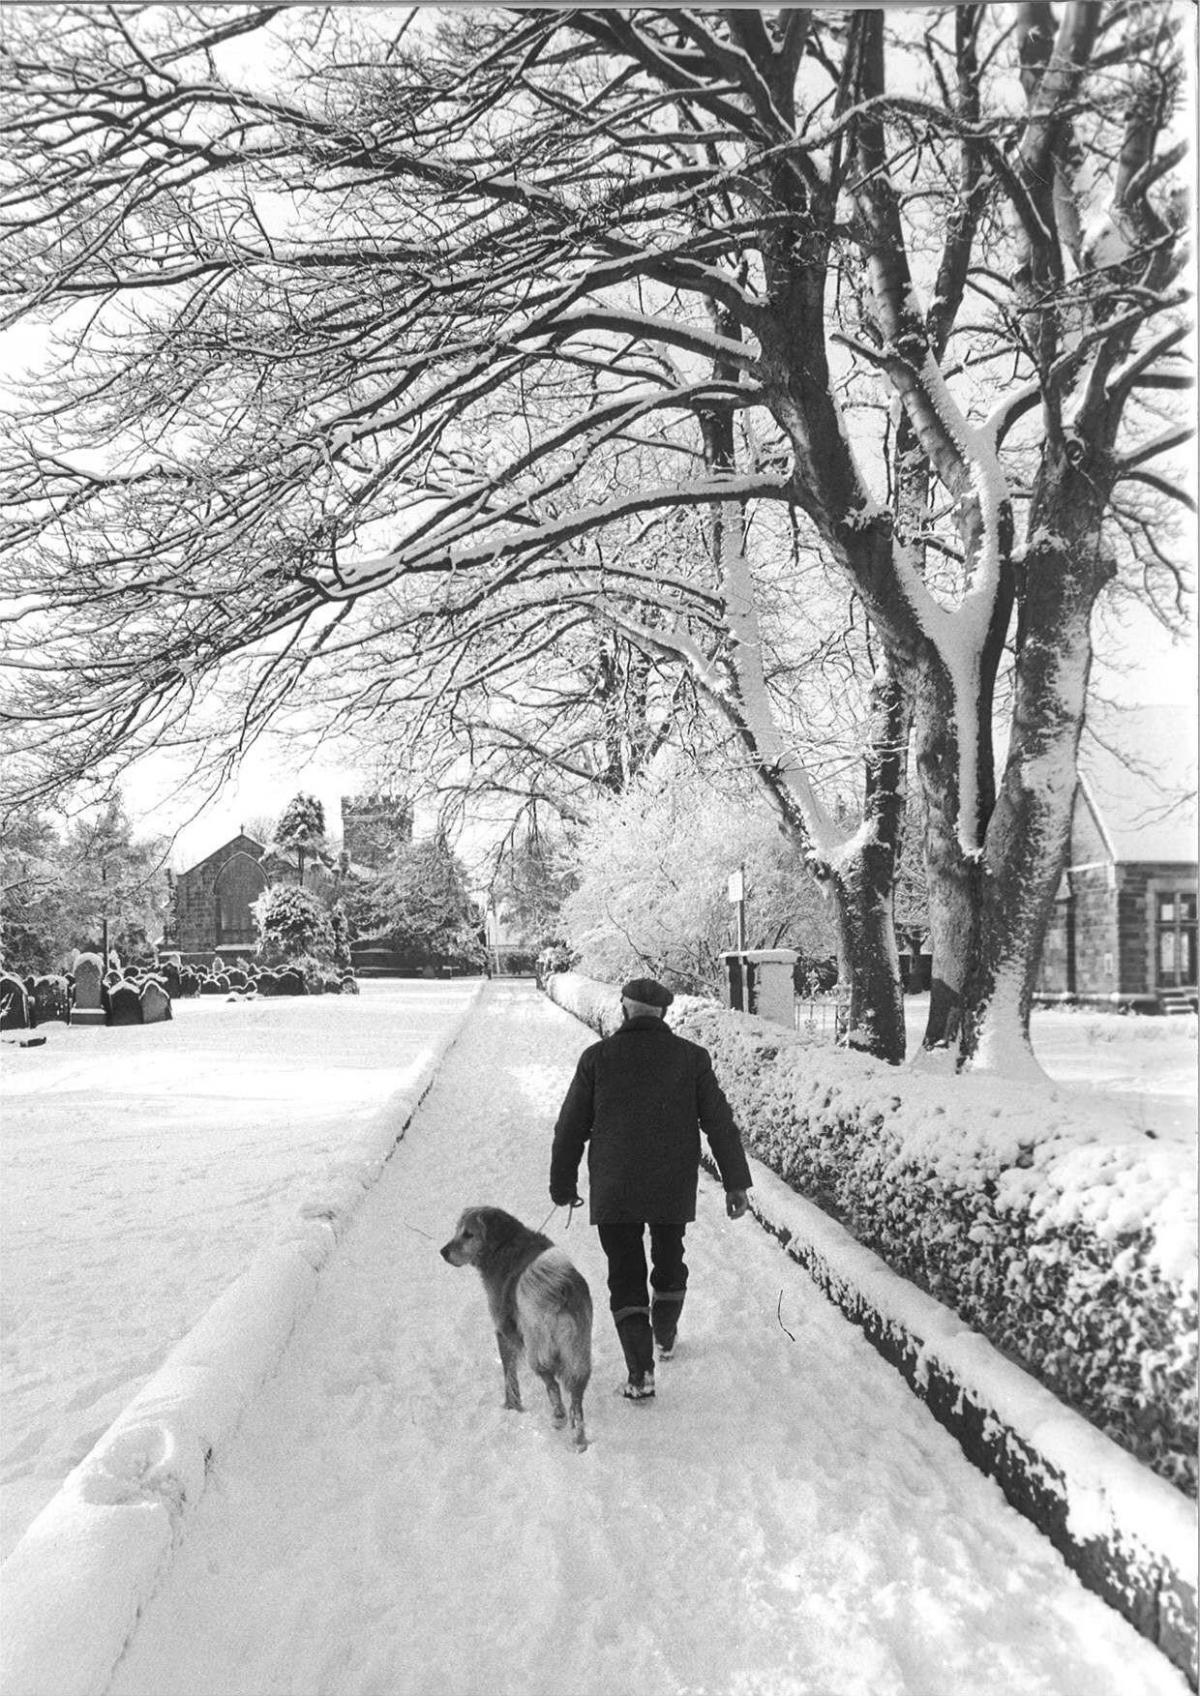 Taking the dog for a walk in Guisborough in December 1985